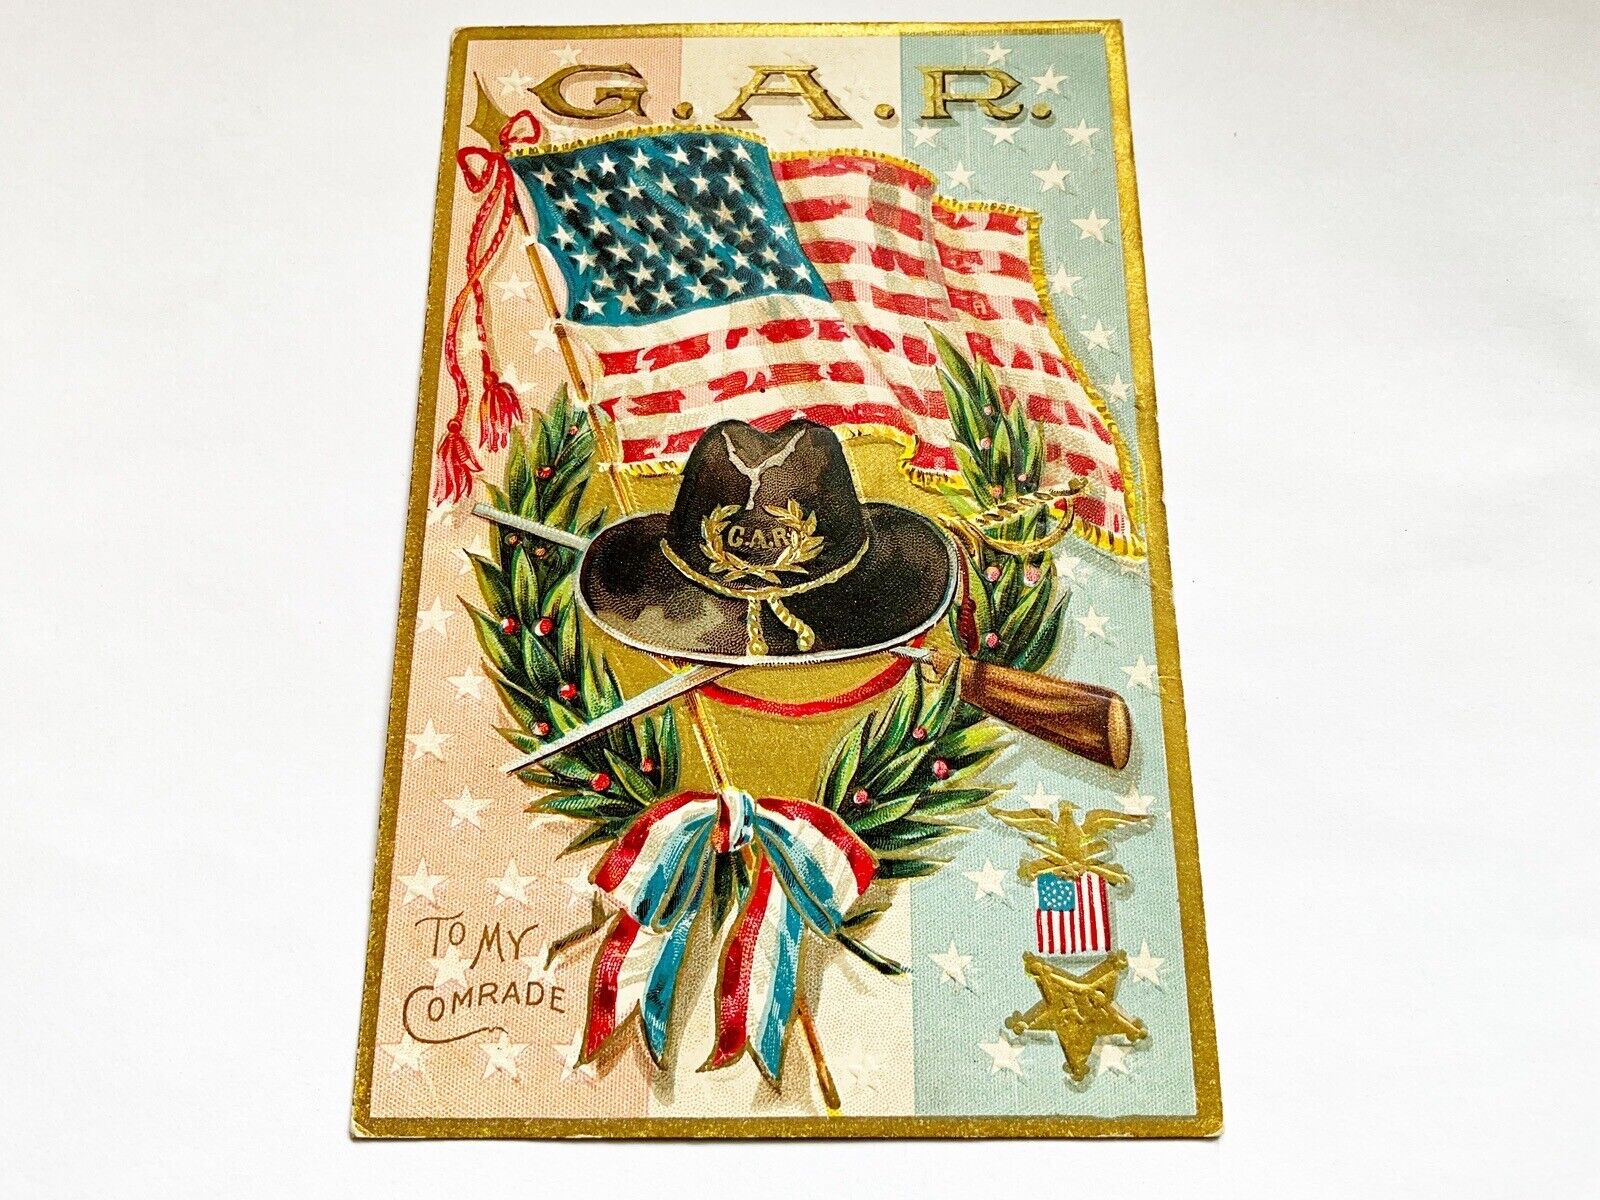 G.A.R. “To My Comrade” Embossed Patriotic Antique Postcard